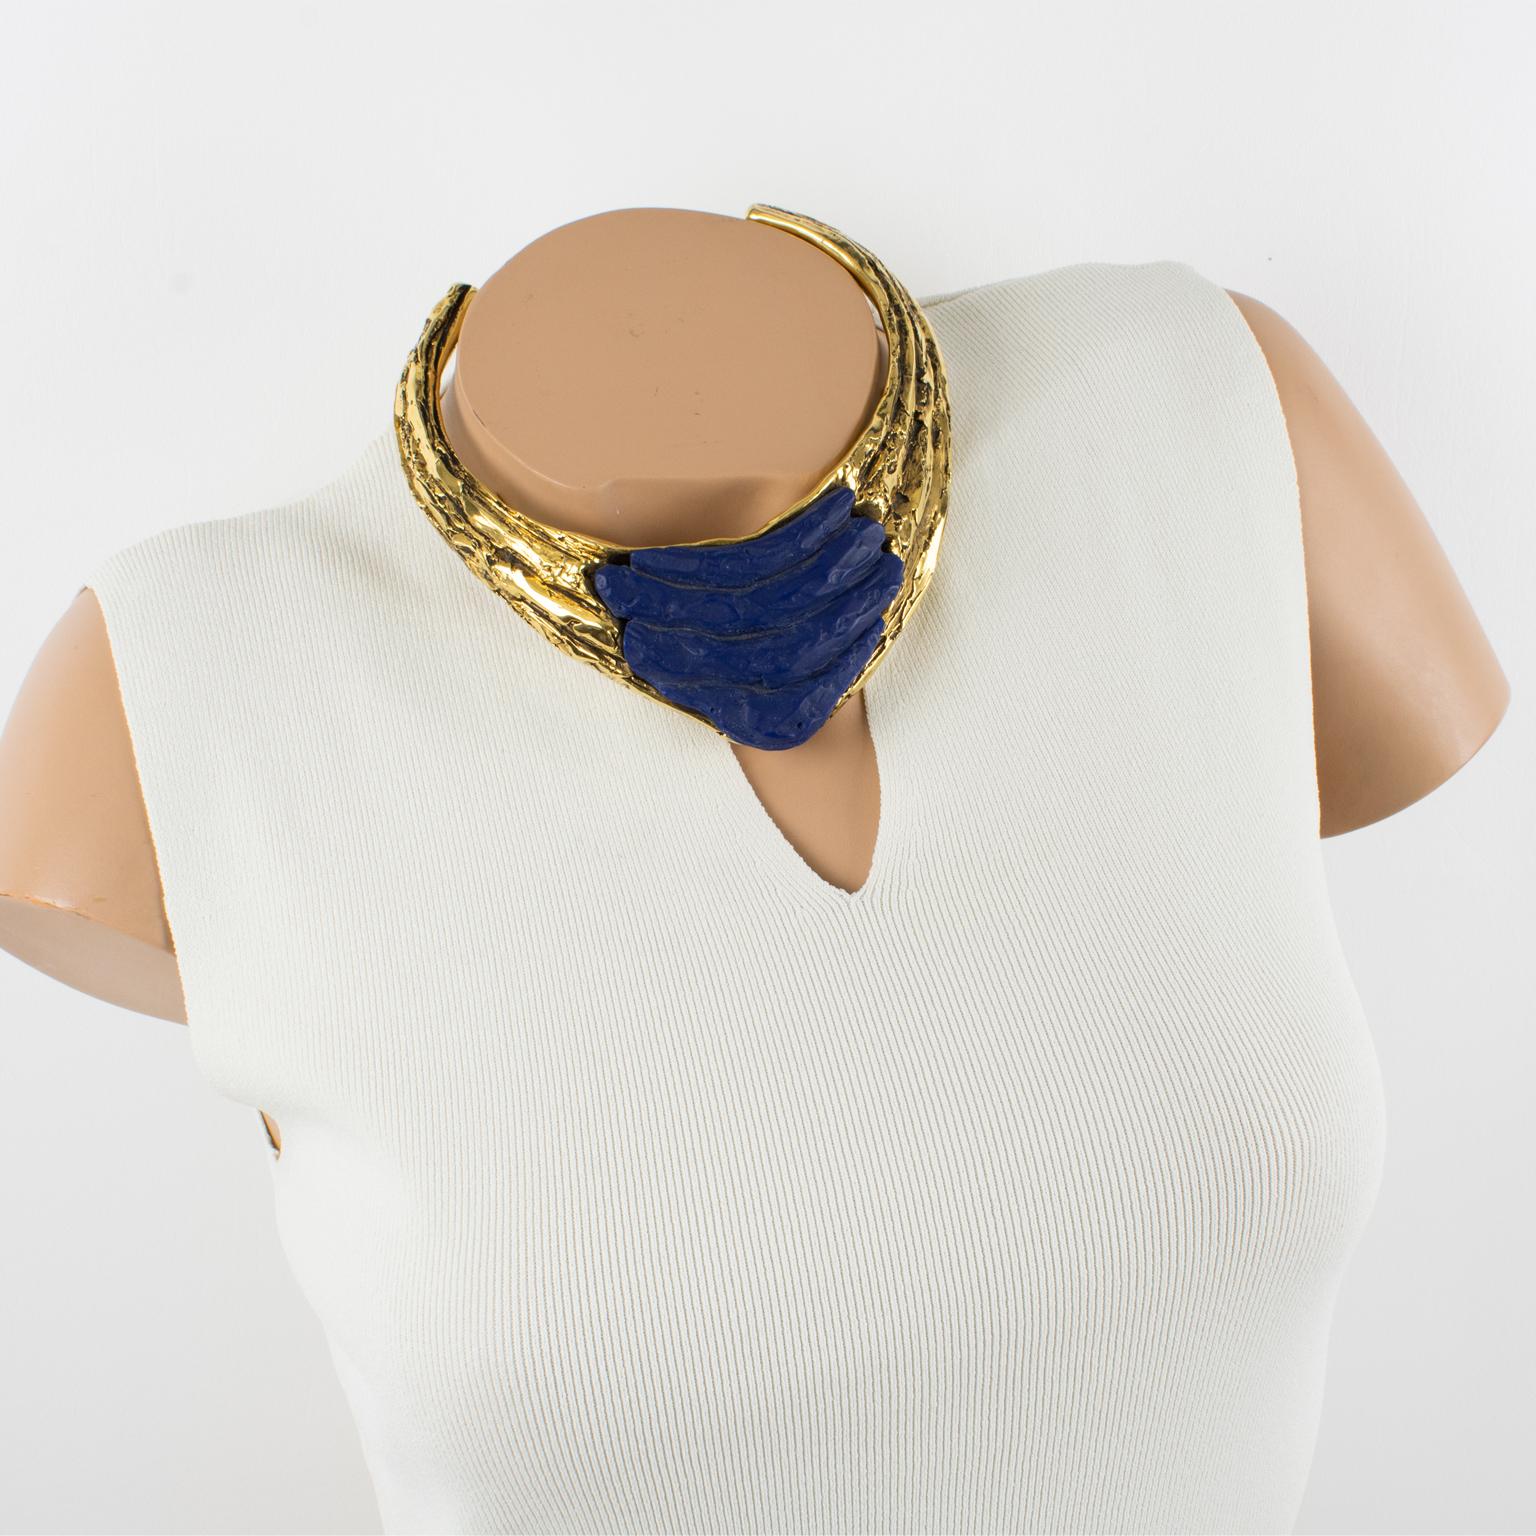 Claude Montana Paris designed this spectacular around-the-neck necklace for Claire Deve in the 1980s. The massive torque shape features a brutalist futuristic design built with gilded metal-coated resin. The piece is ornate on the front with a